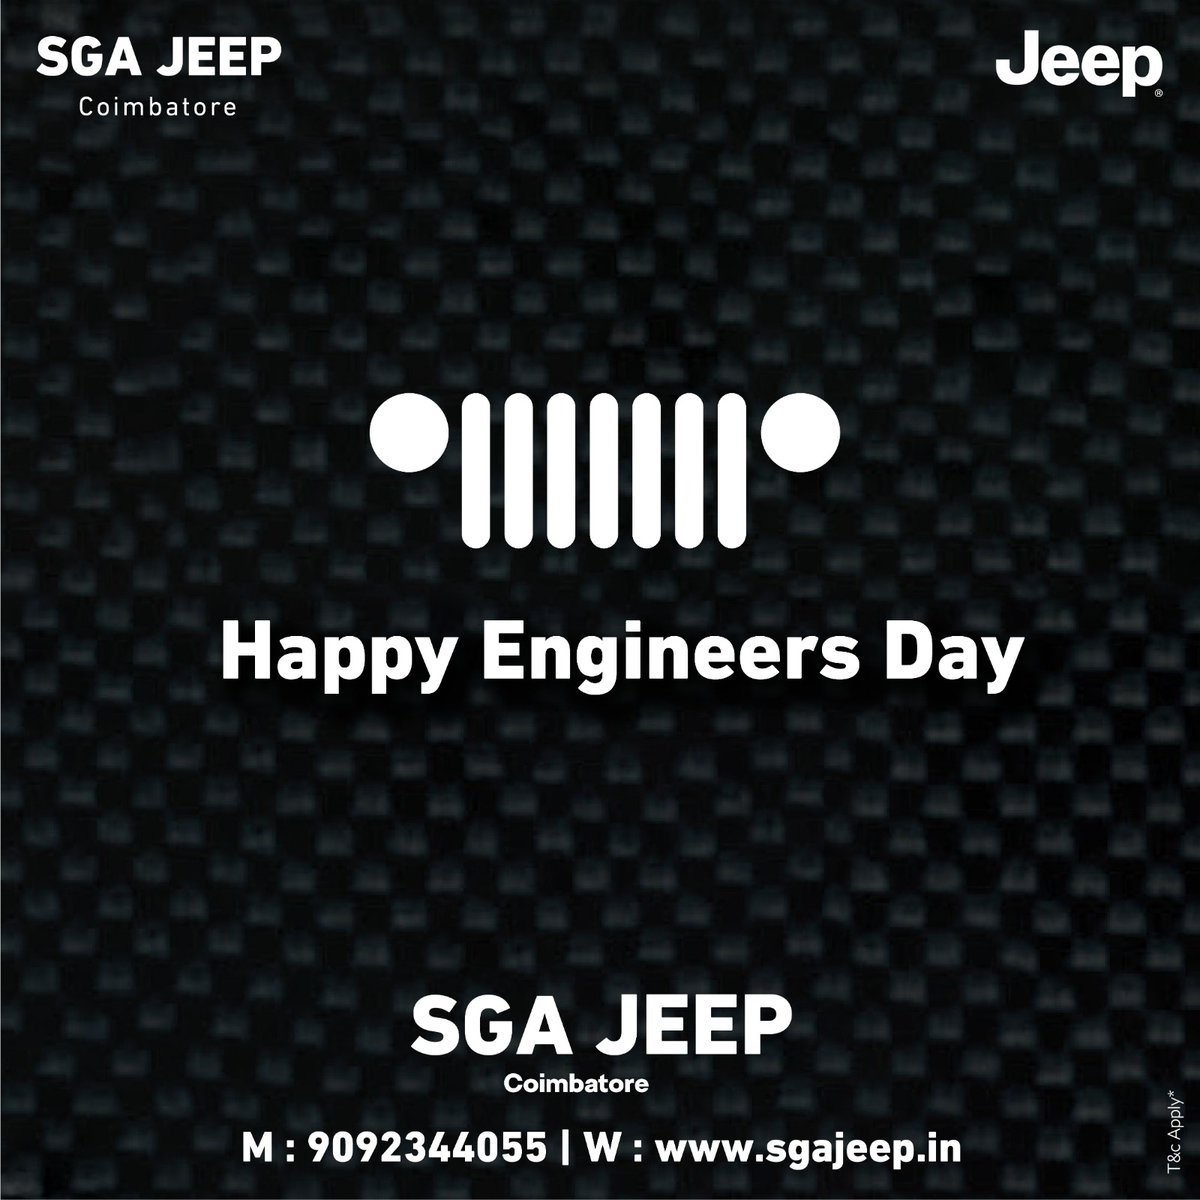 May your Innovations Continue to Reshape Our World. 

Happy Engineer's Day! 😊

#engineersday #engineeringexcellence #innovationinengineering #engineerlife #engineeringcommunity #Jeep #JeepLife #JeepIndia #JeepWave #TrailRated #Sga #SgaJeep